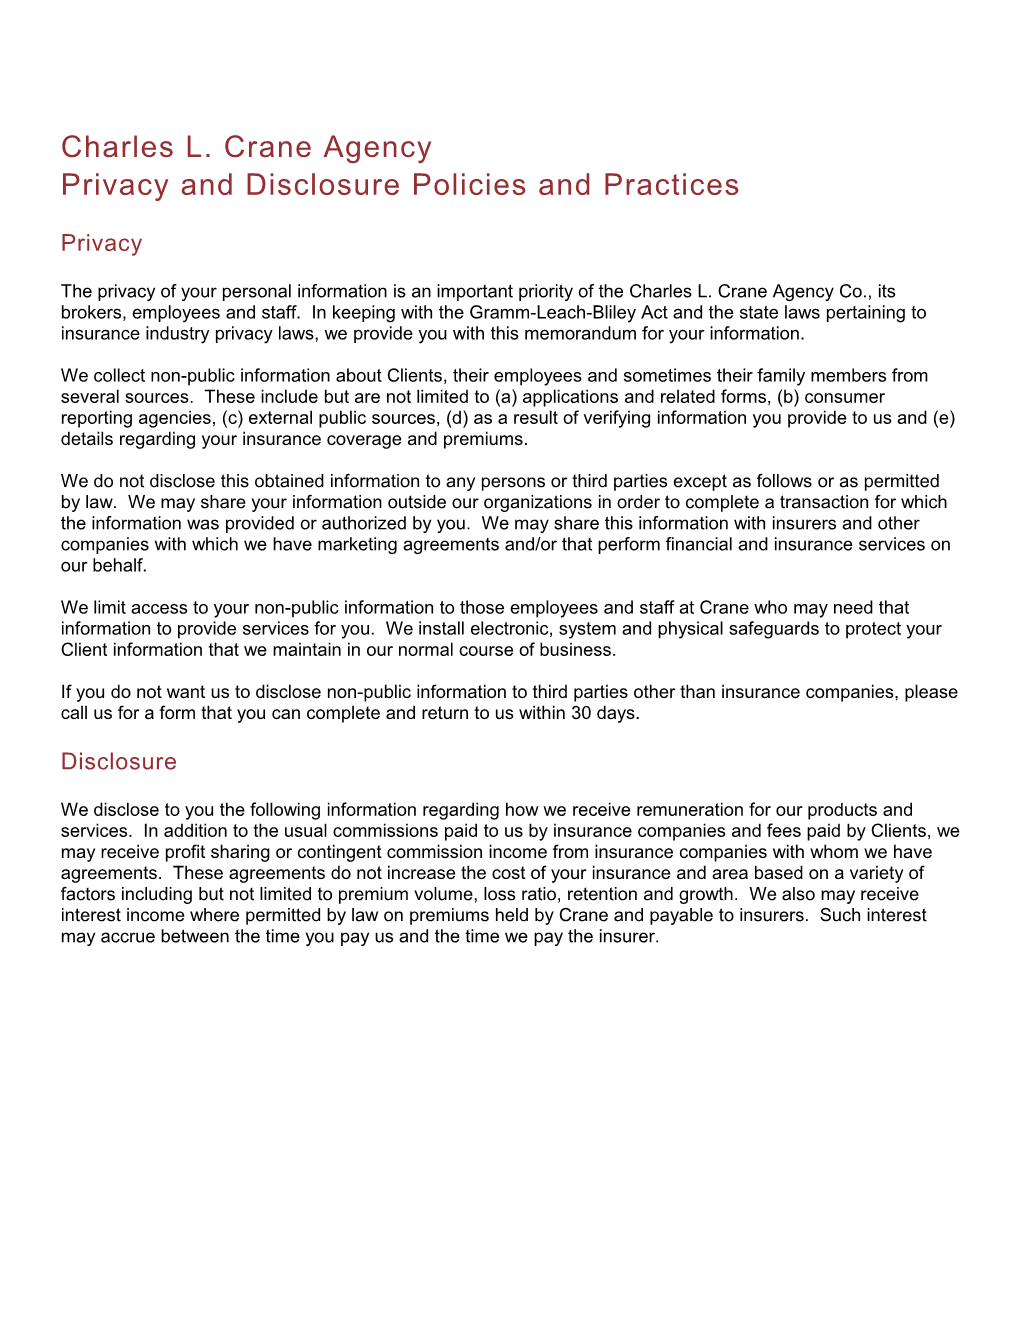 Privacy and Disclosure Policies and Practices